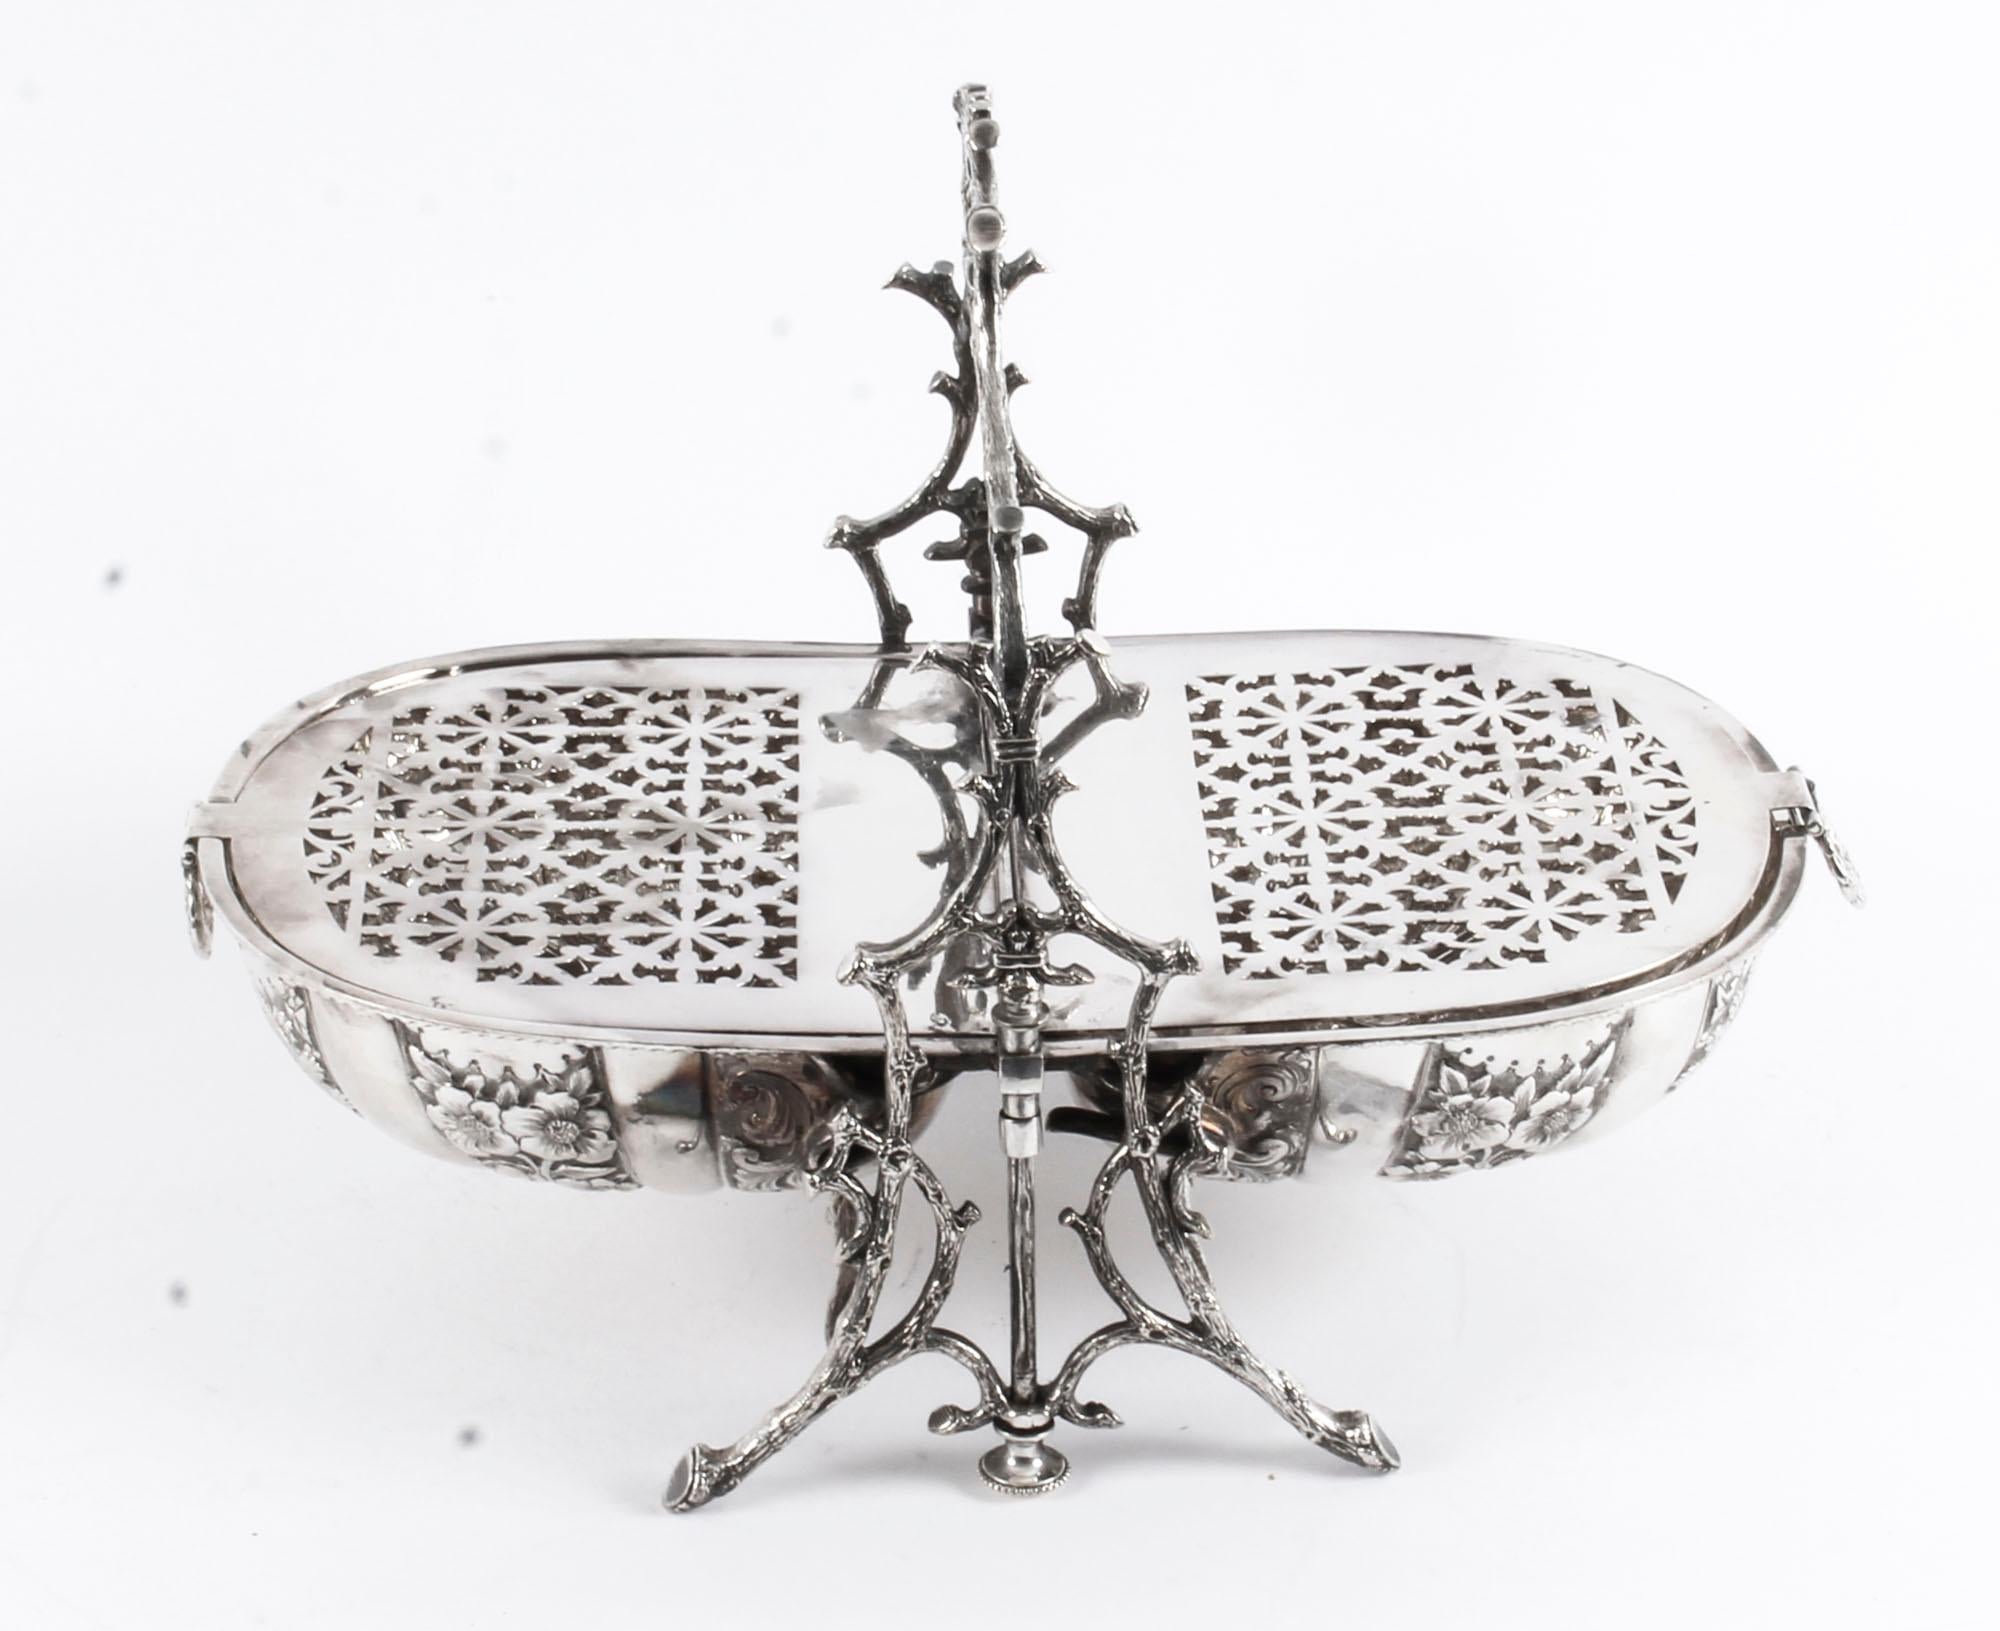 Late 19th Century Silver Plate Folding Sweets Biscuit Box The Alexander Clark, 19th Century